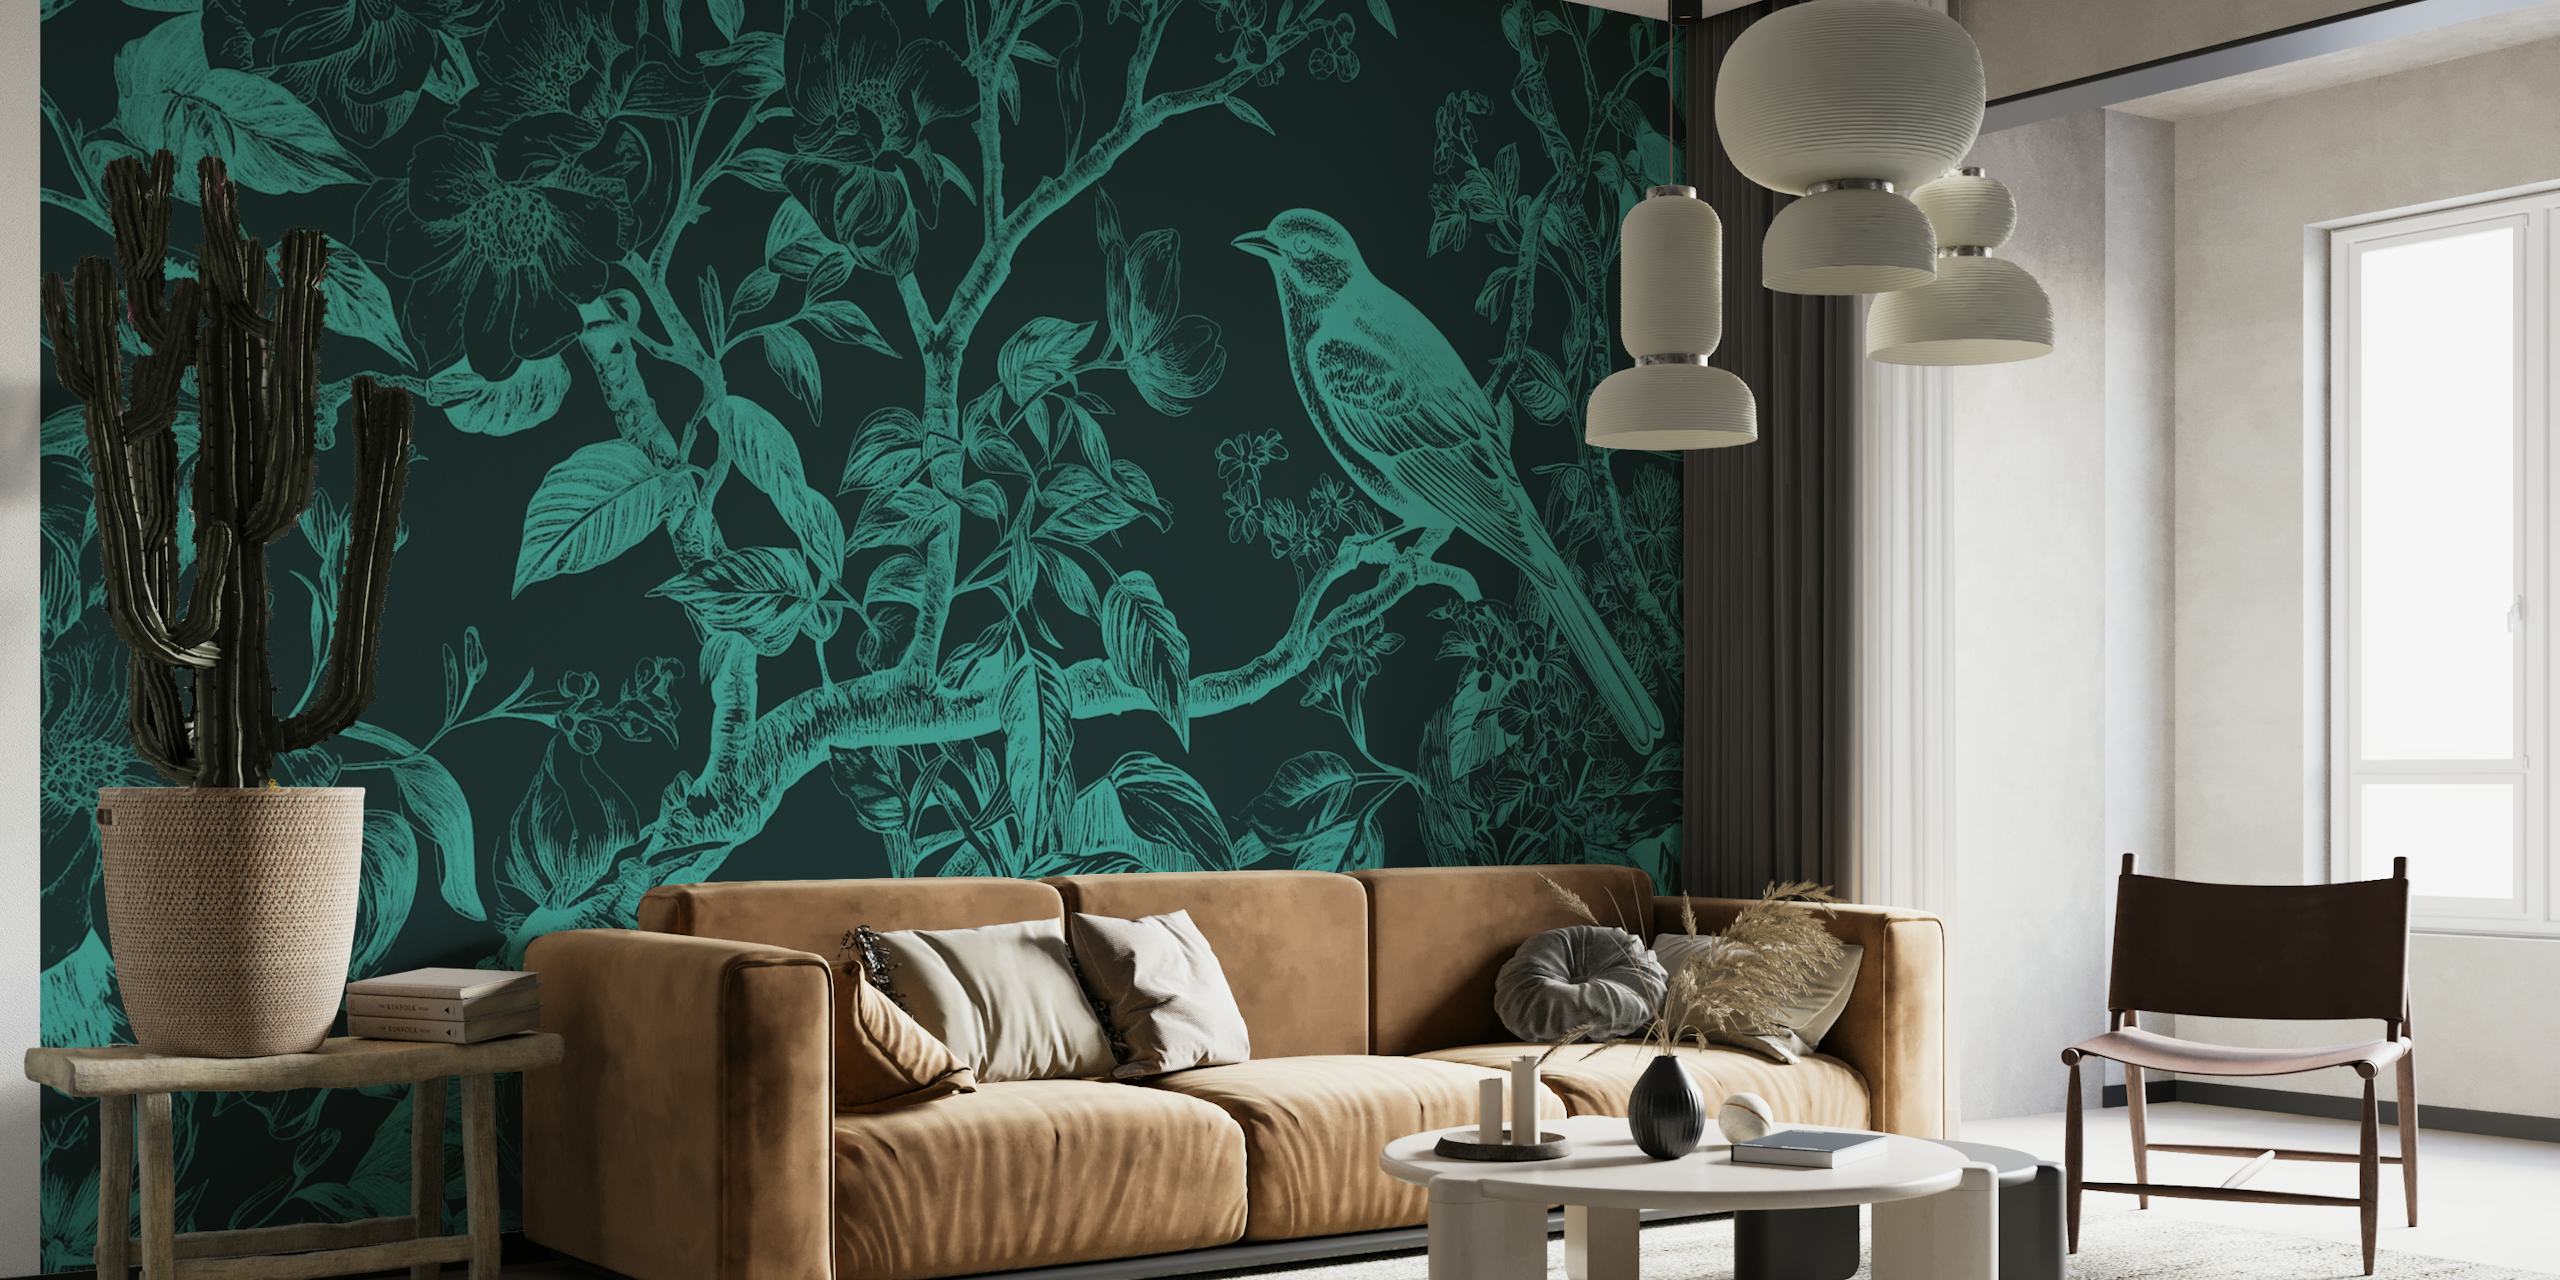 Classic blue bird wall mural with floral patterns in a blue-tone palette